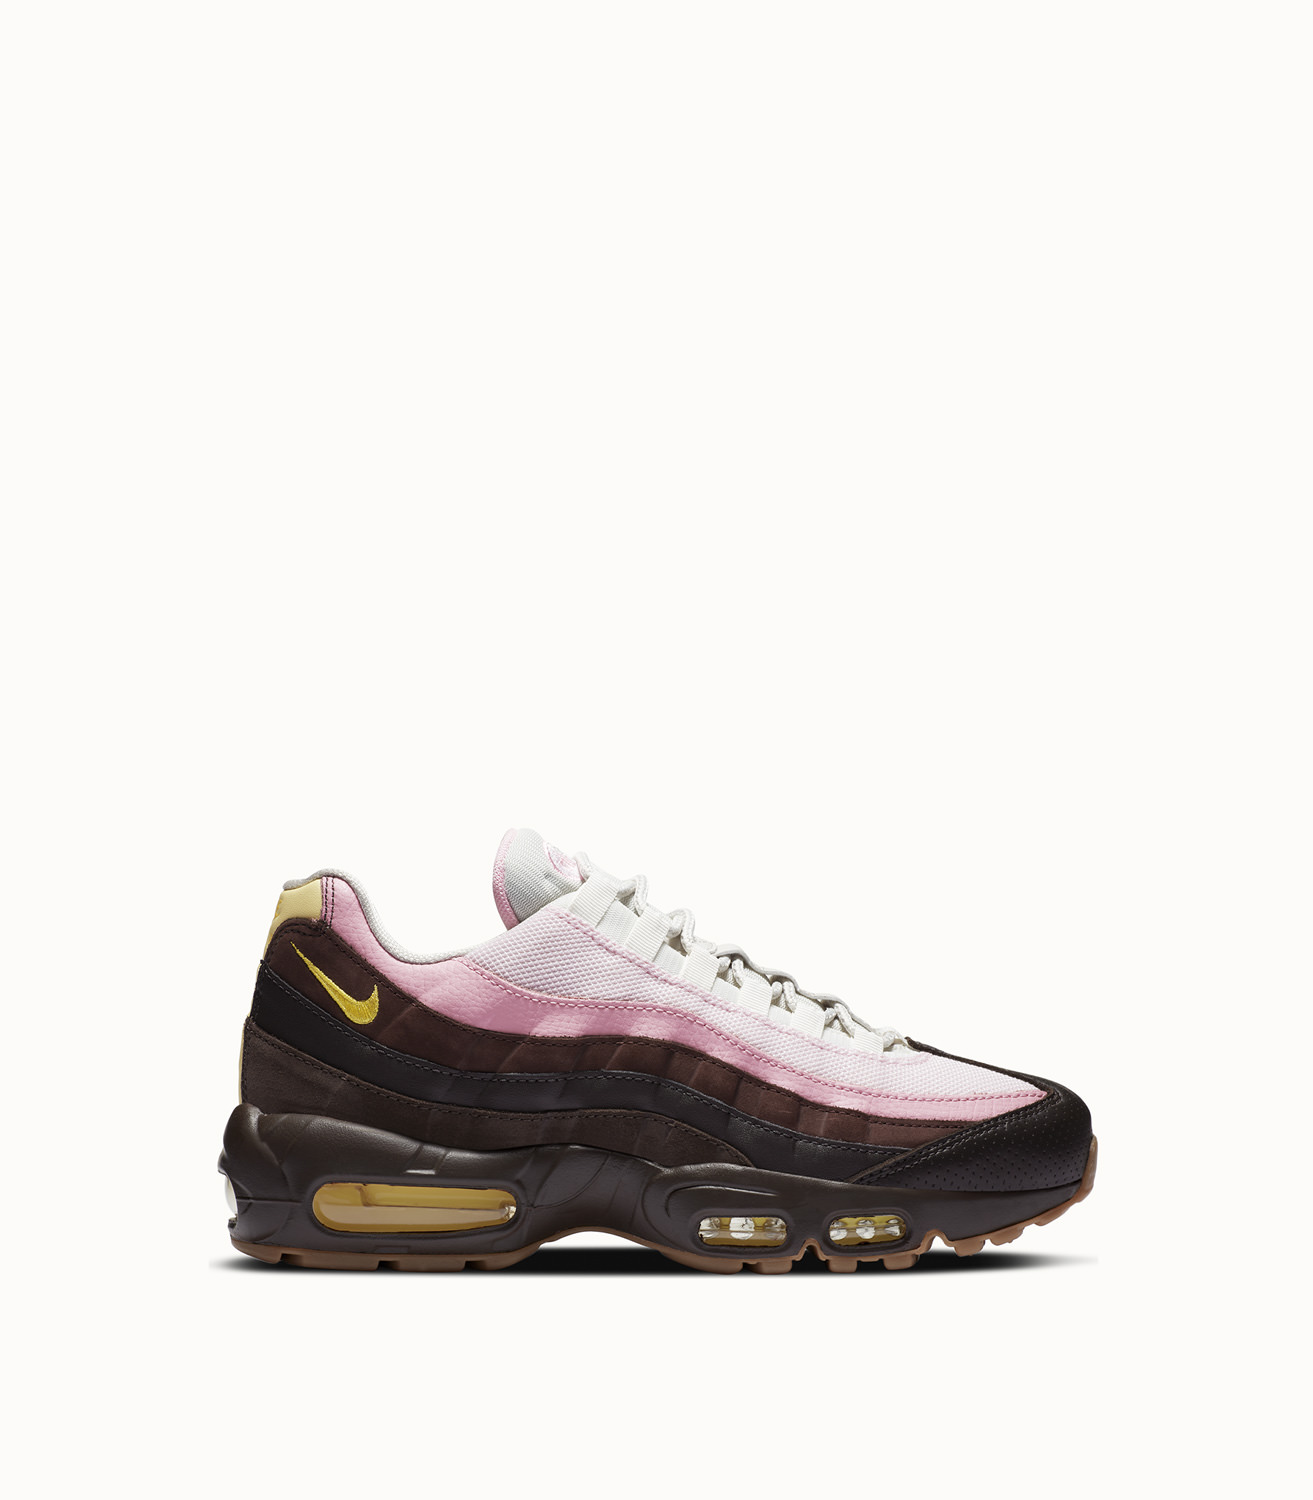 nike air max 95 sole height